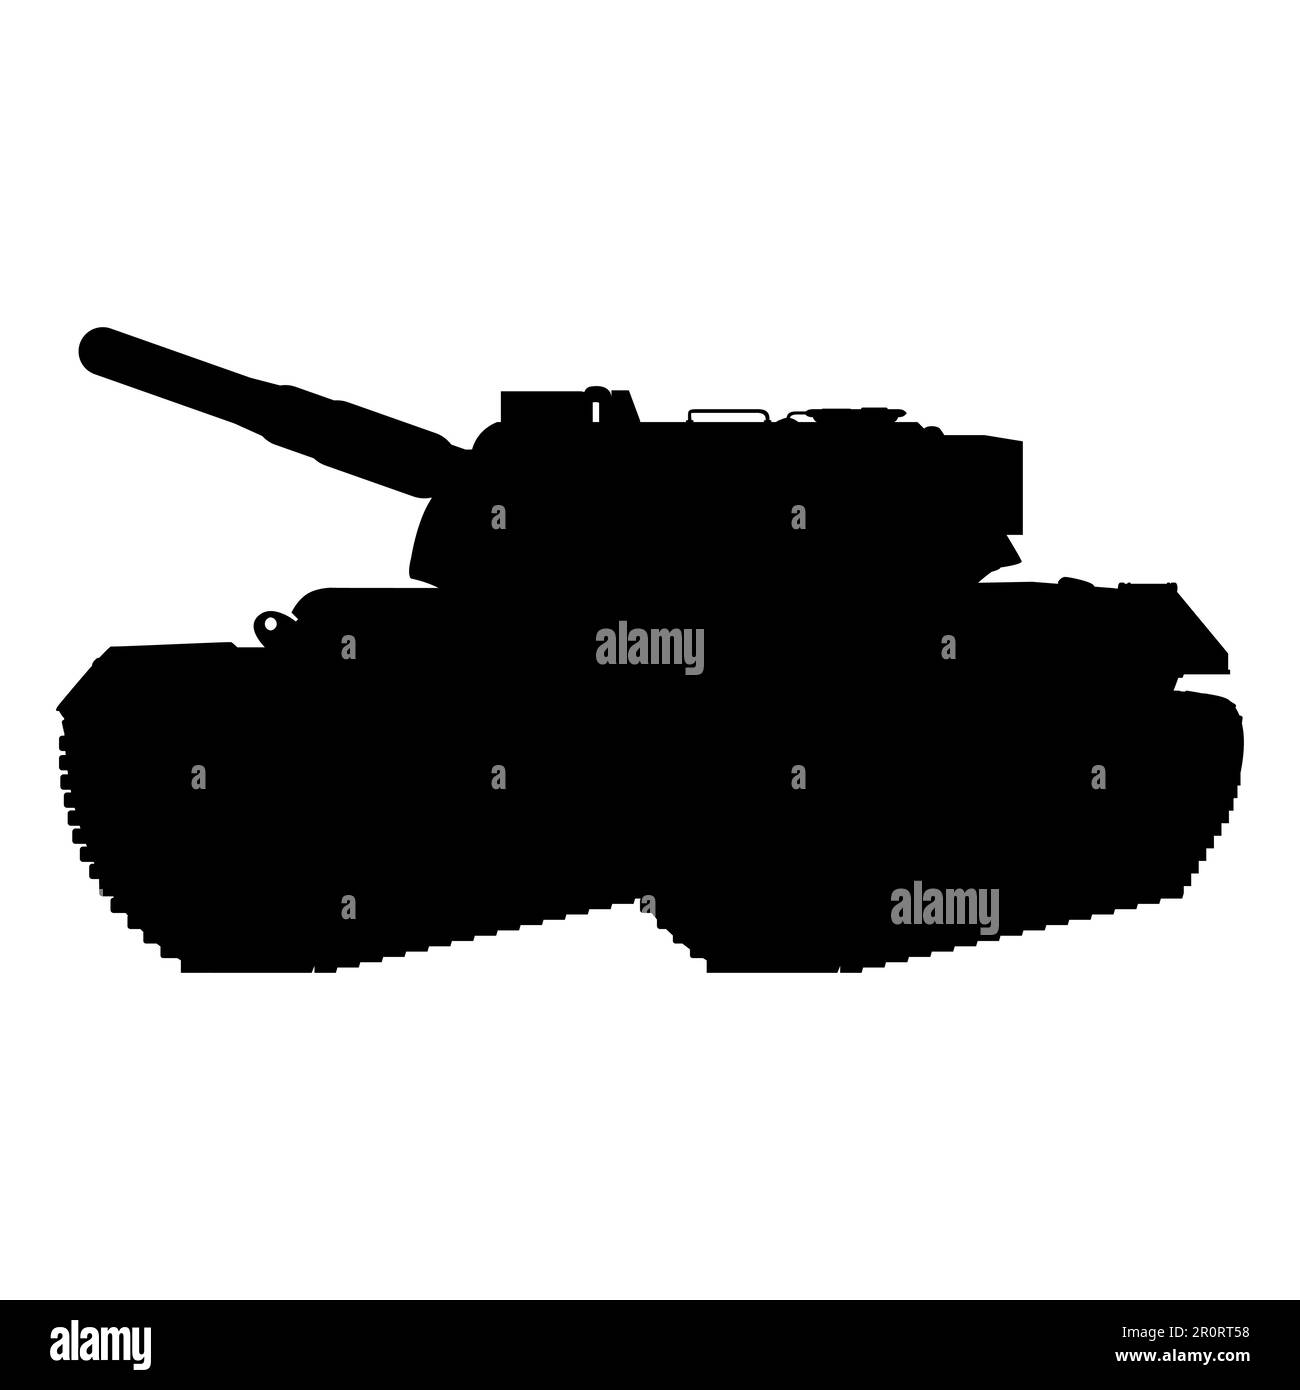 German Leopard I main battle tank silhouette style. Military vehicle. Vector illustration isolated on white background. Stock Vector